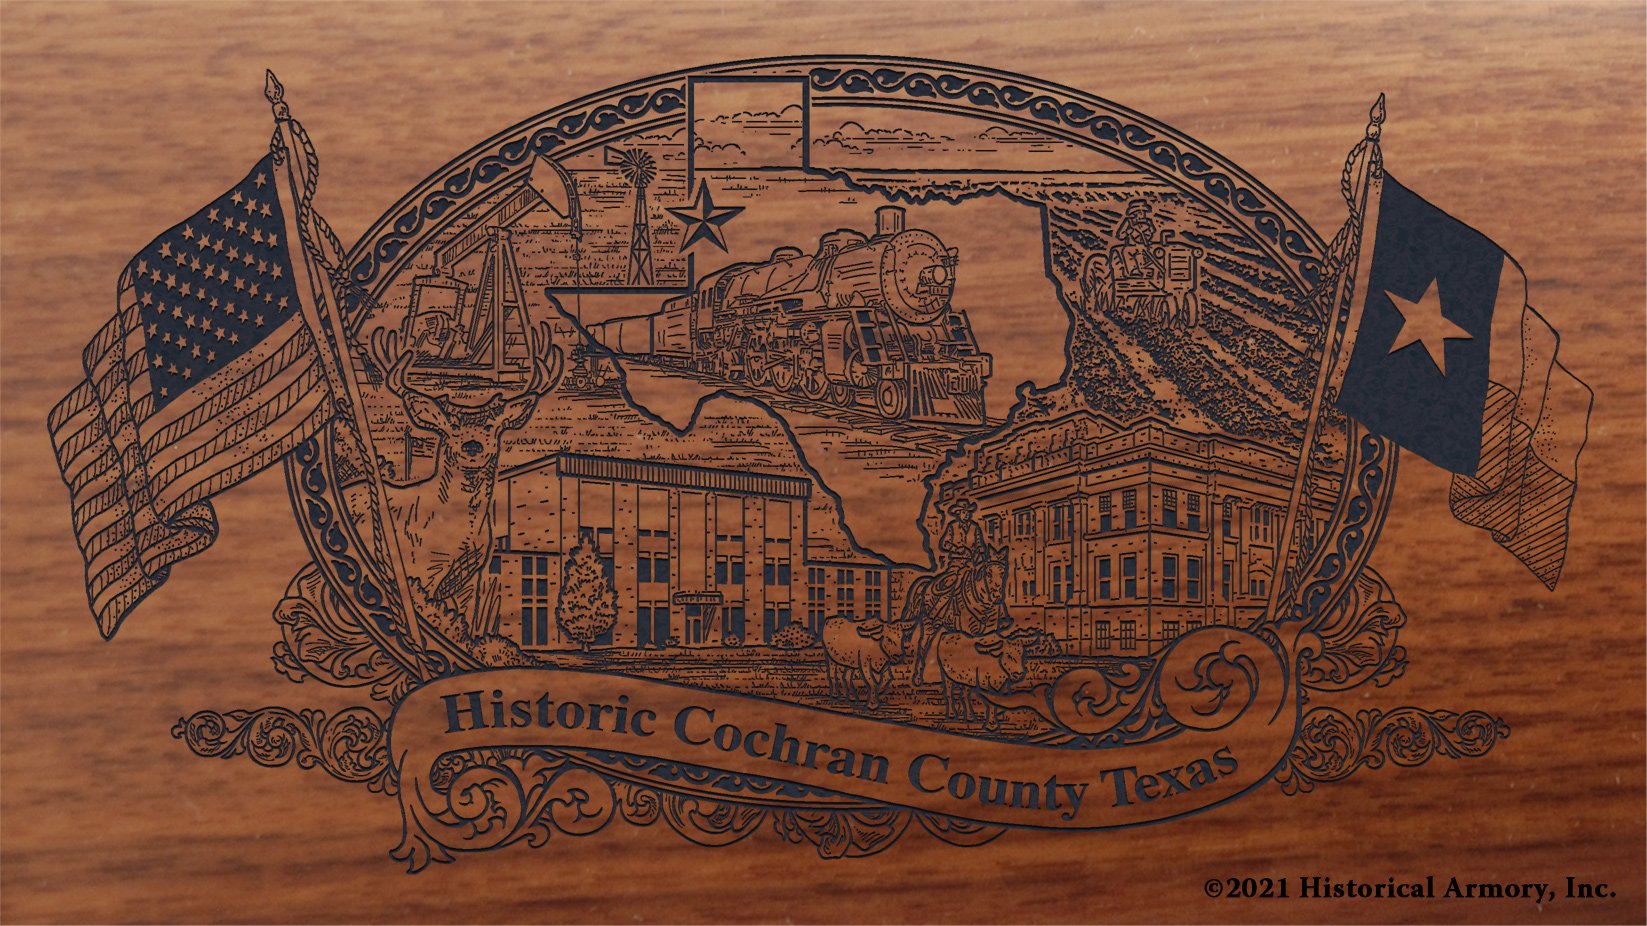 Engraved artwork | History of Cochran County Texas | Historical Armory